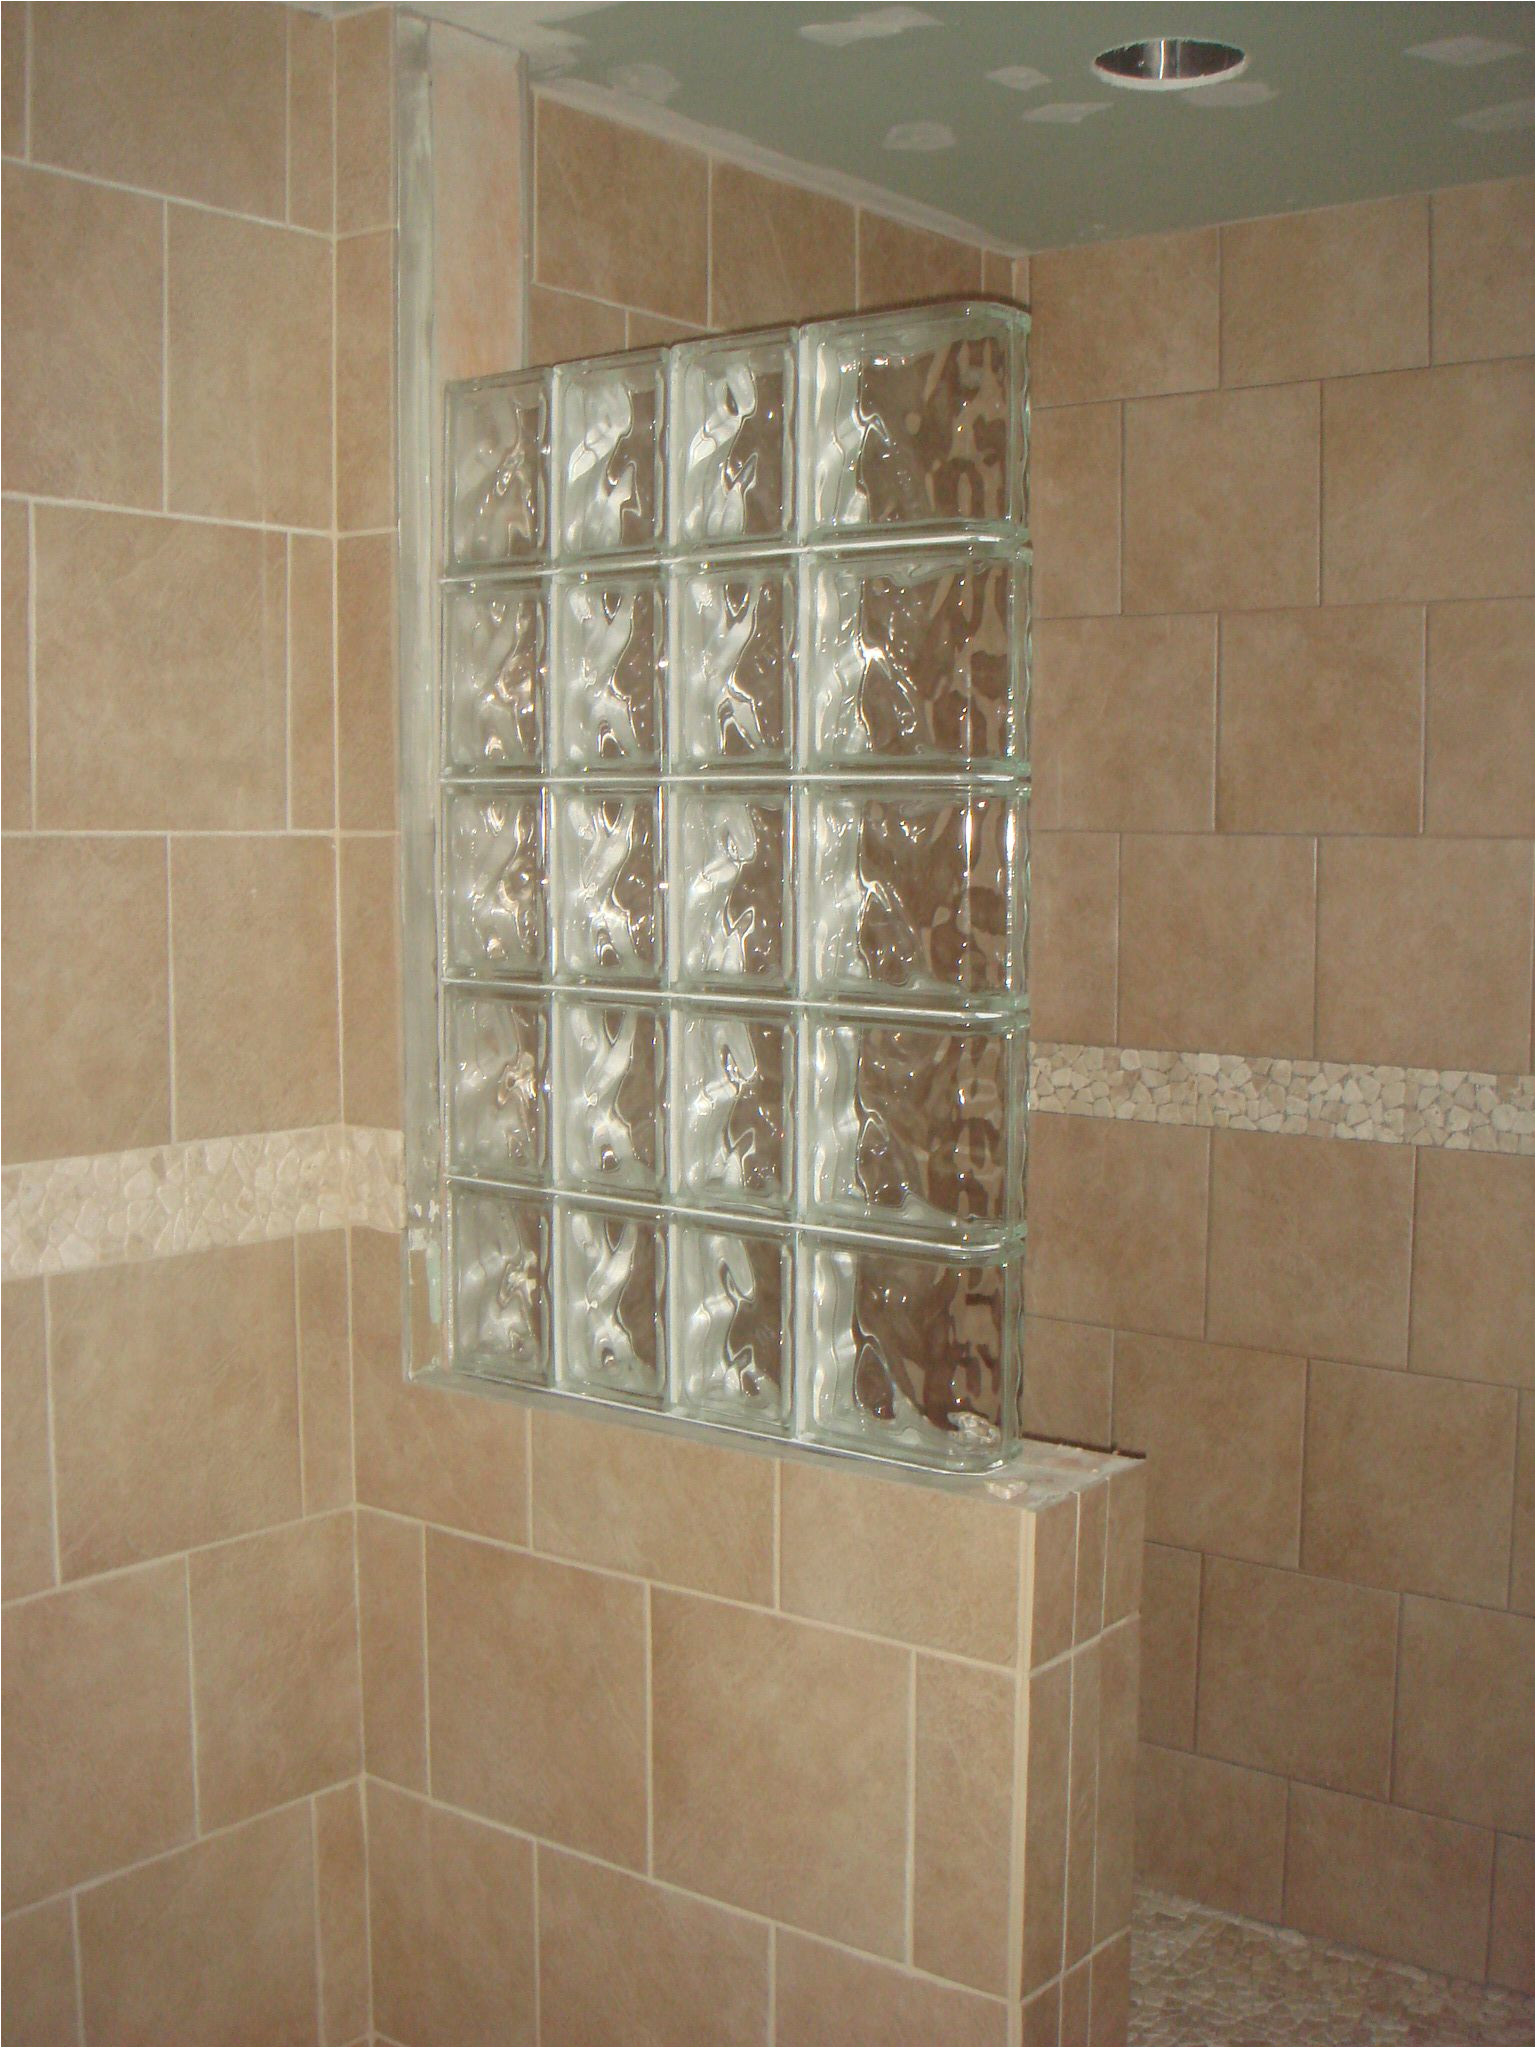 half wall shower design an addition some glass block wall and much of the grouting is done